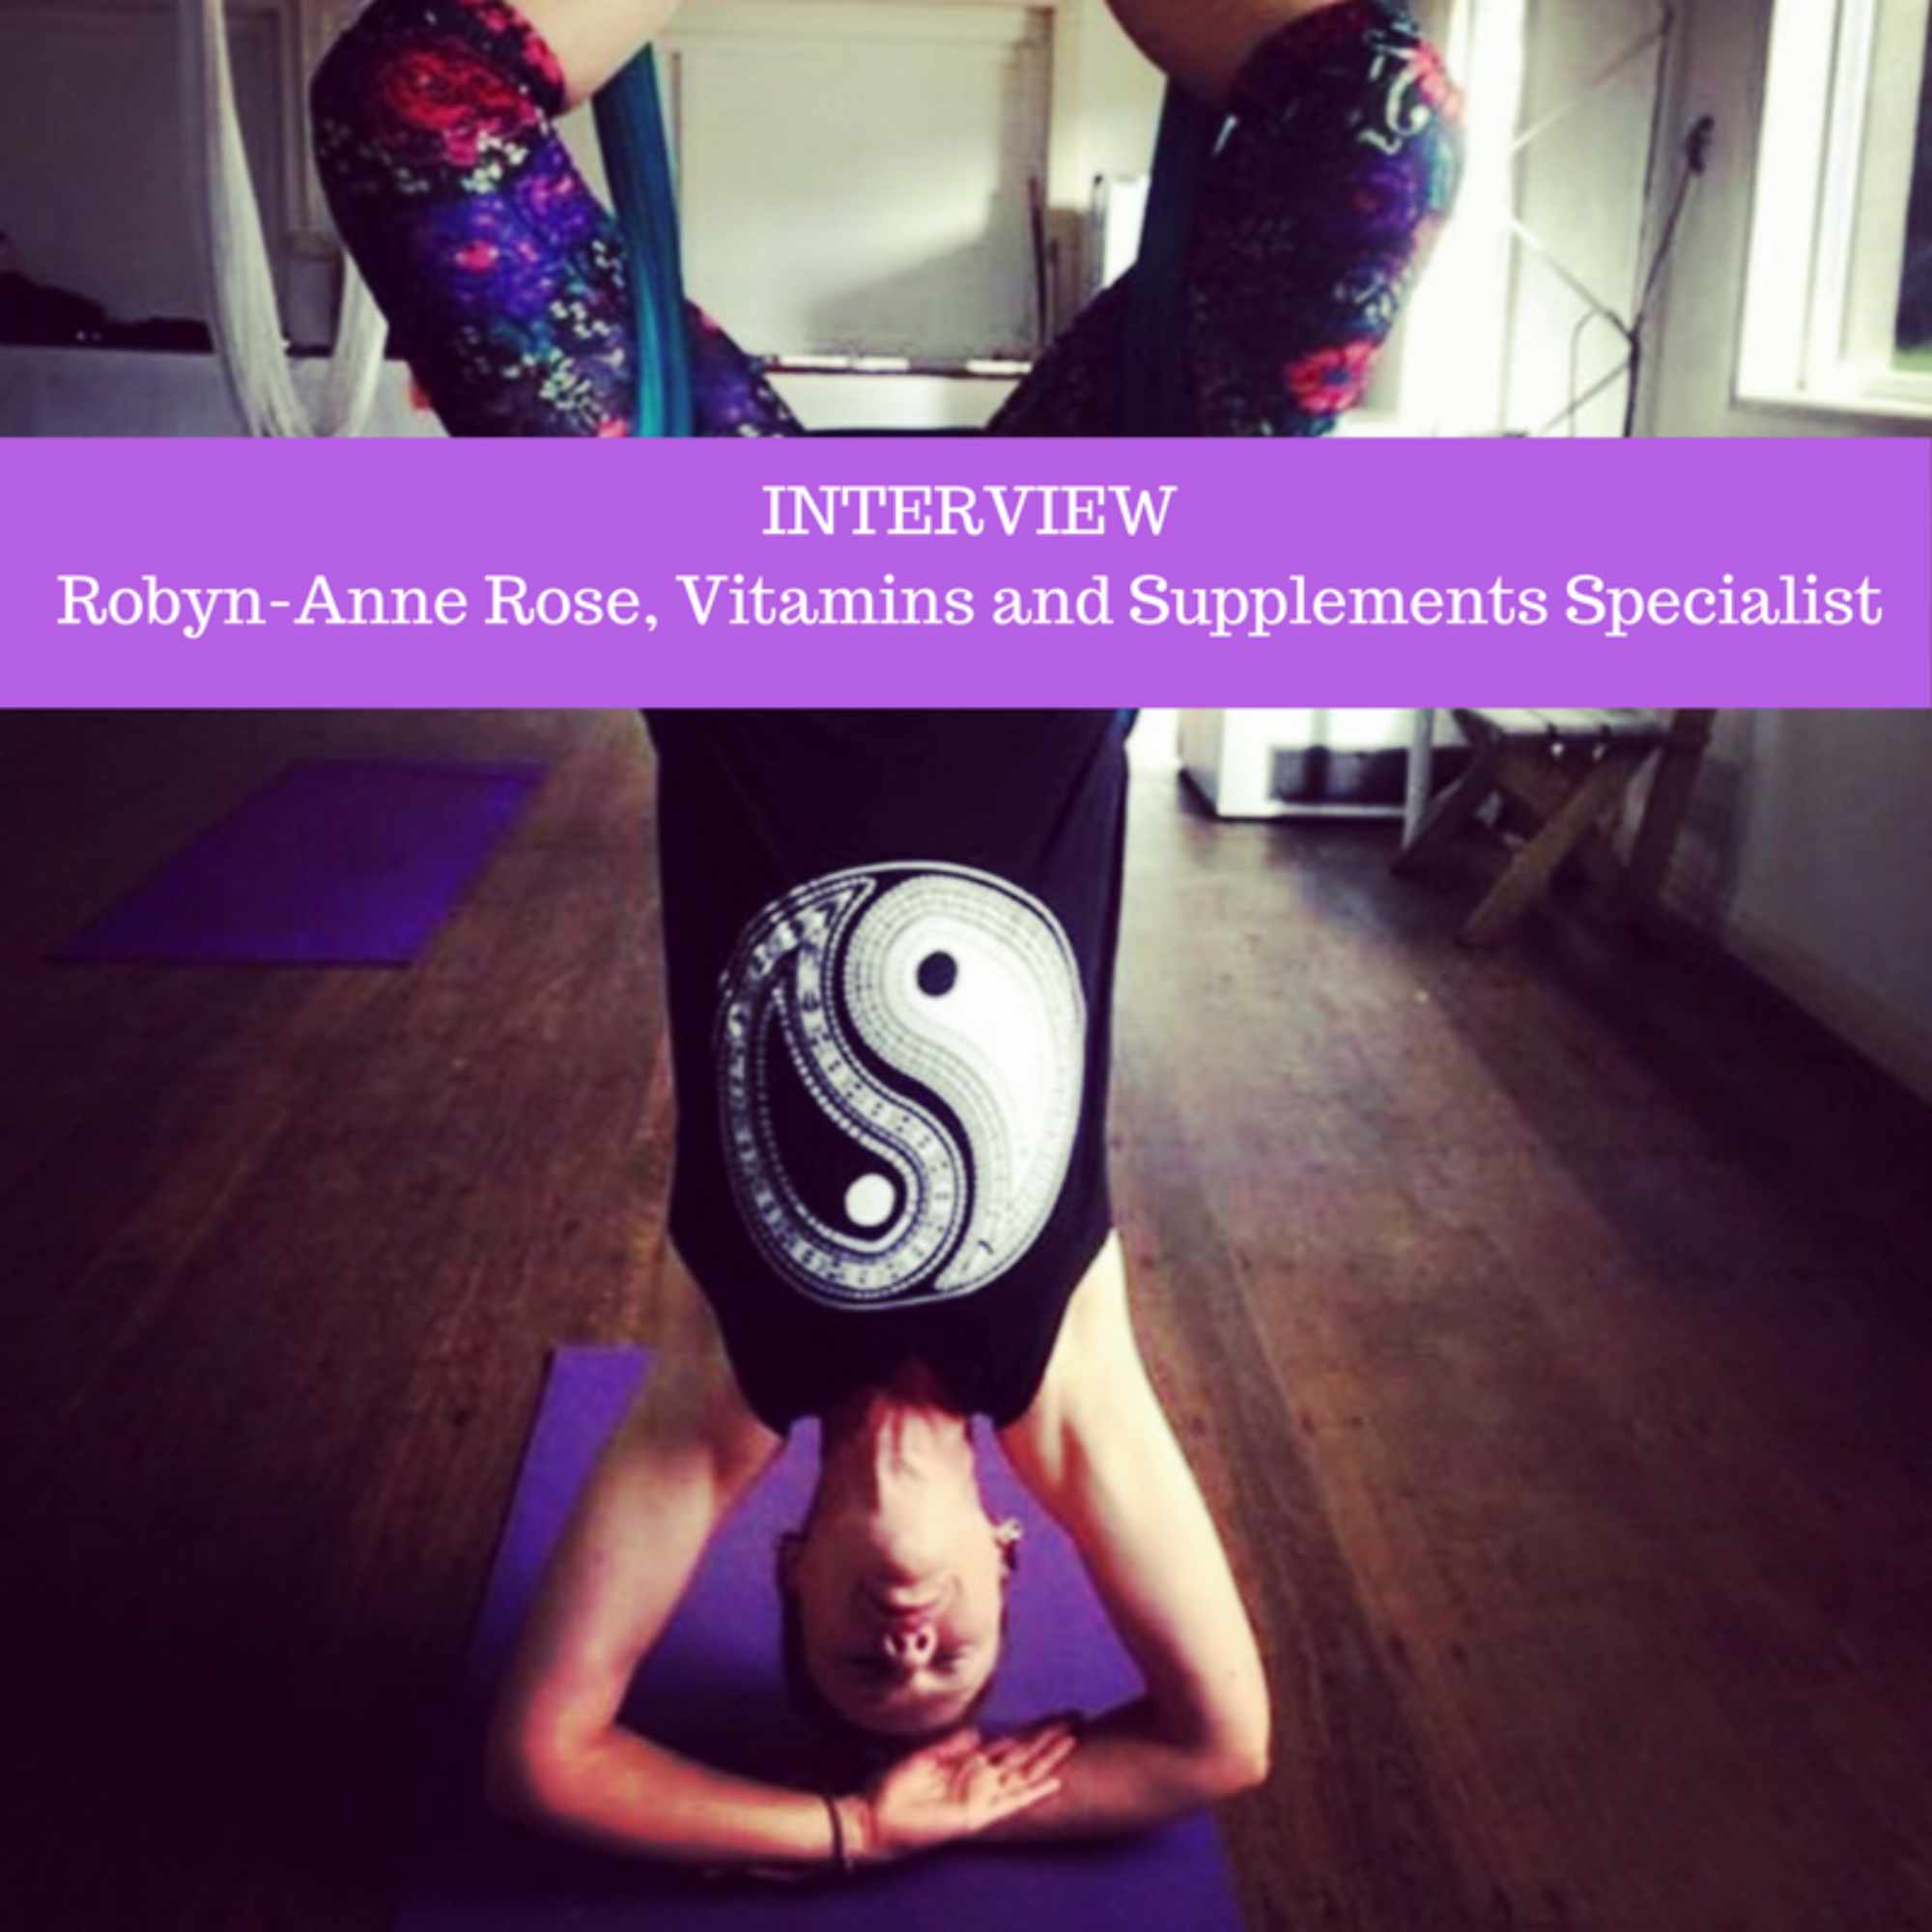 Robyn Anne Rose Dispels A Few Myths About Vitamins And Shares Her Wellness Tips